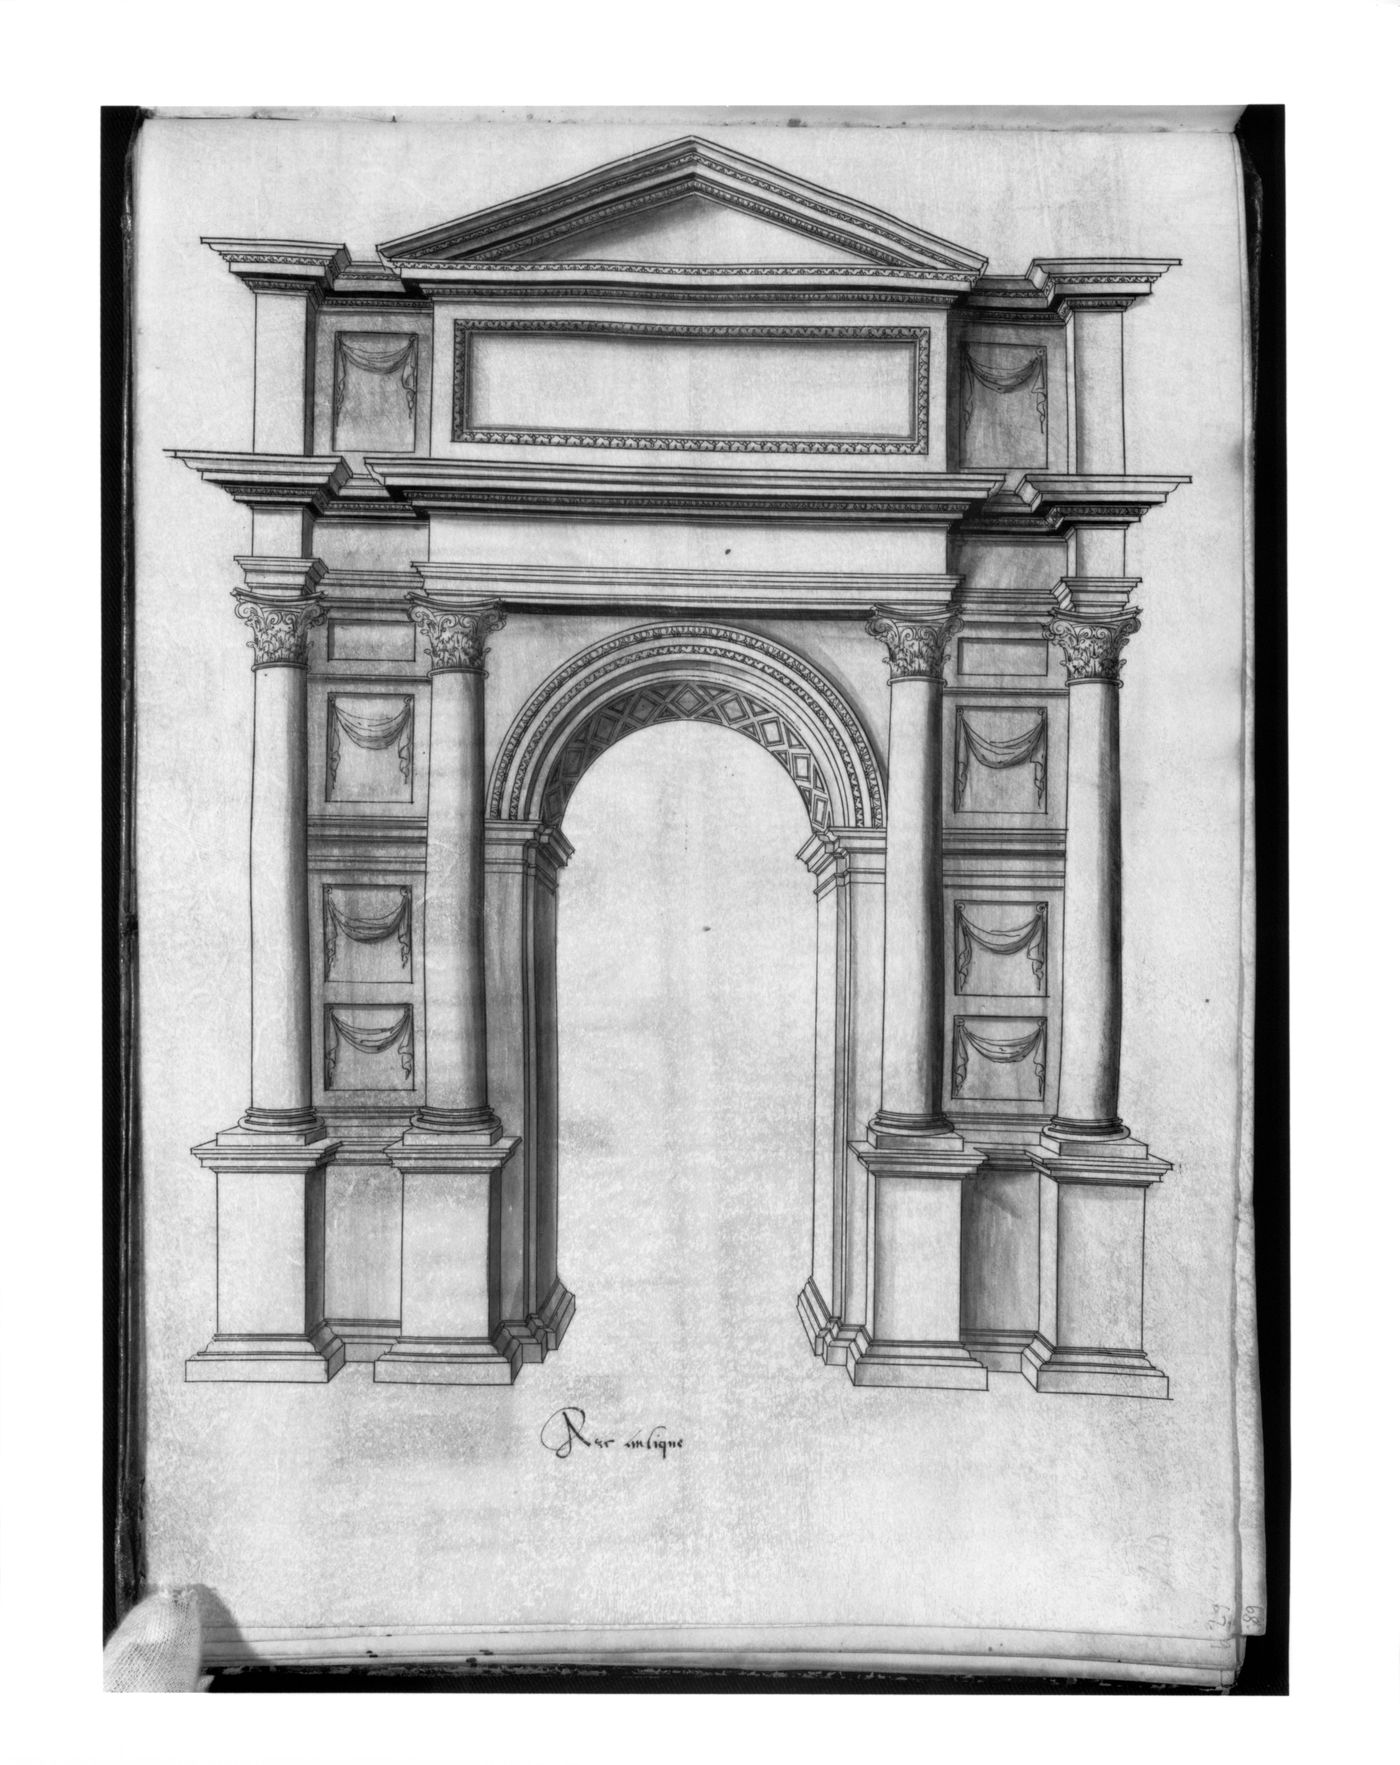 Design for an arch in the antique manner